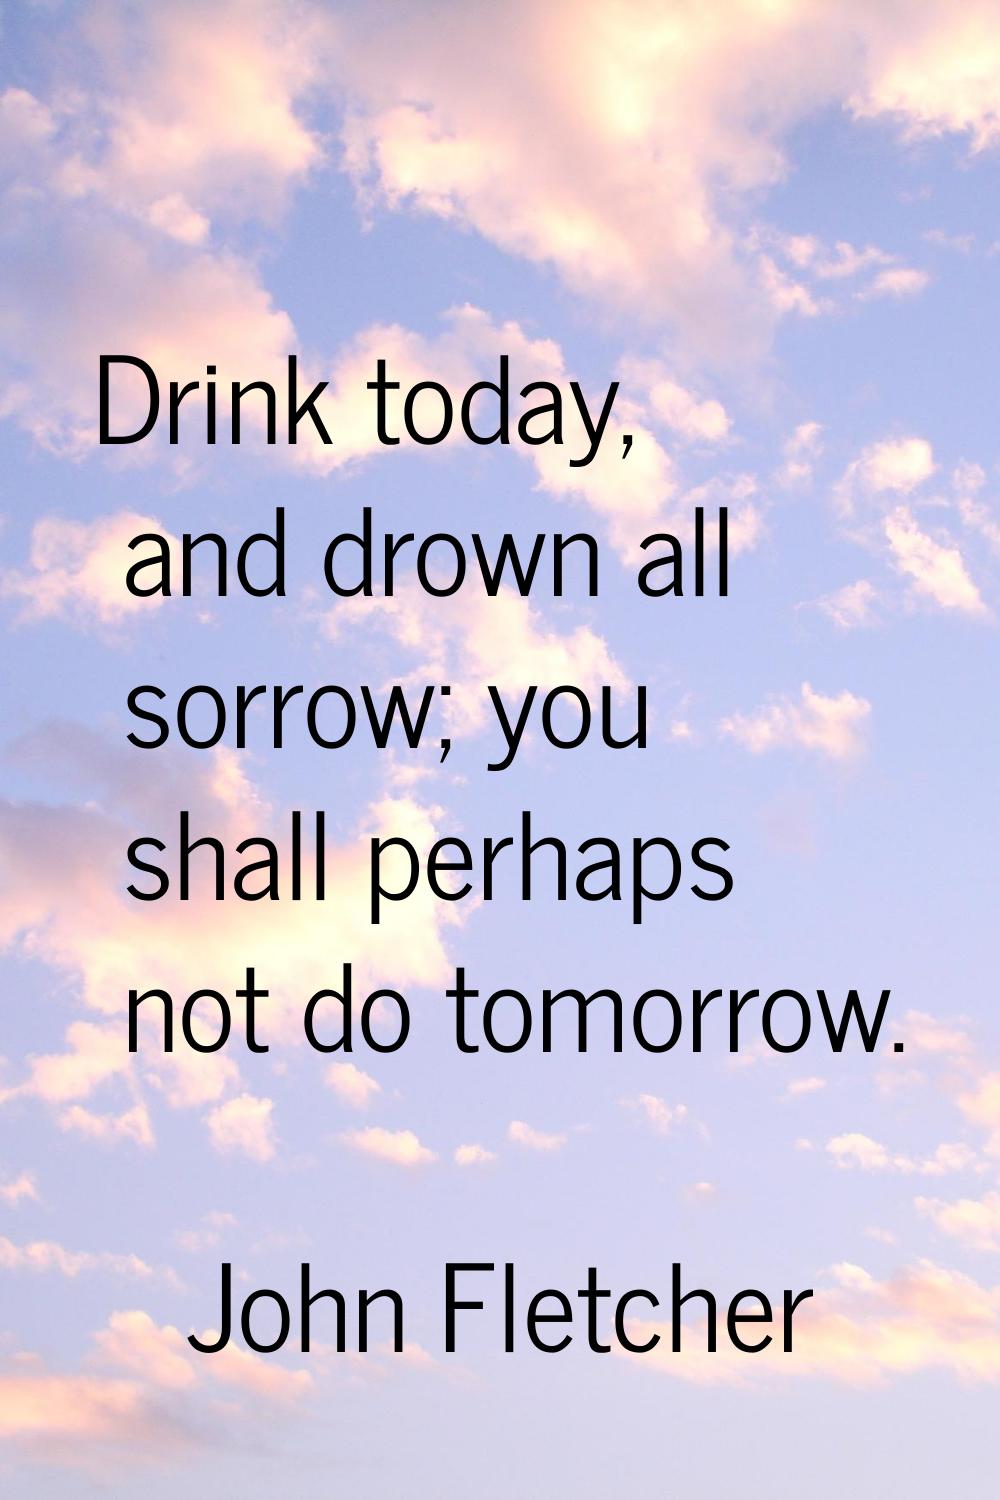 Drink today, and drown all sorrow; you shall perhaps not do tomorrow.